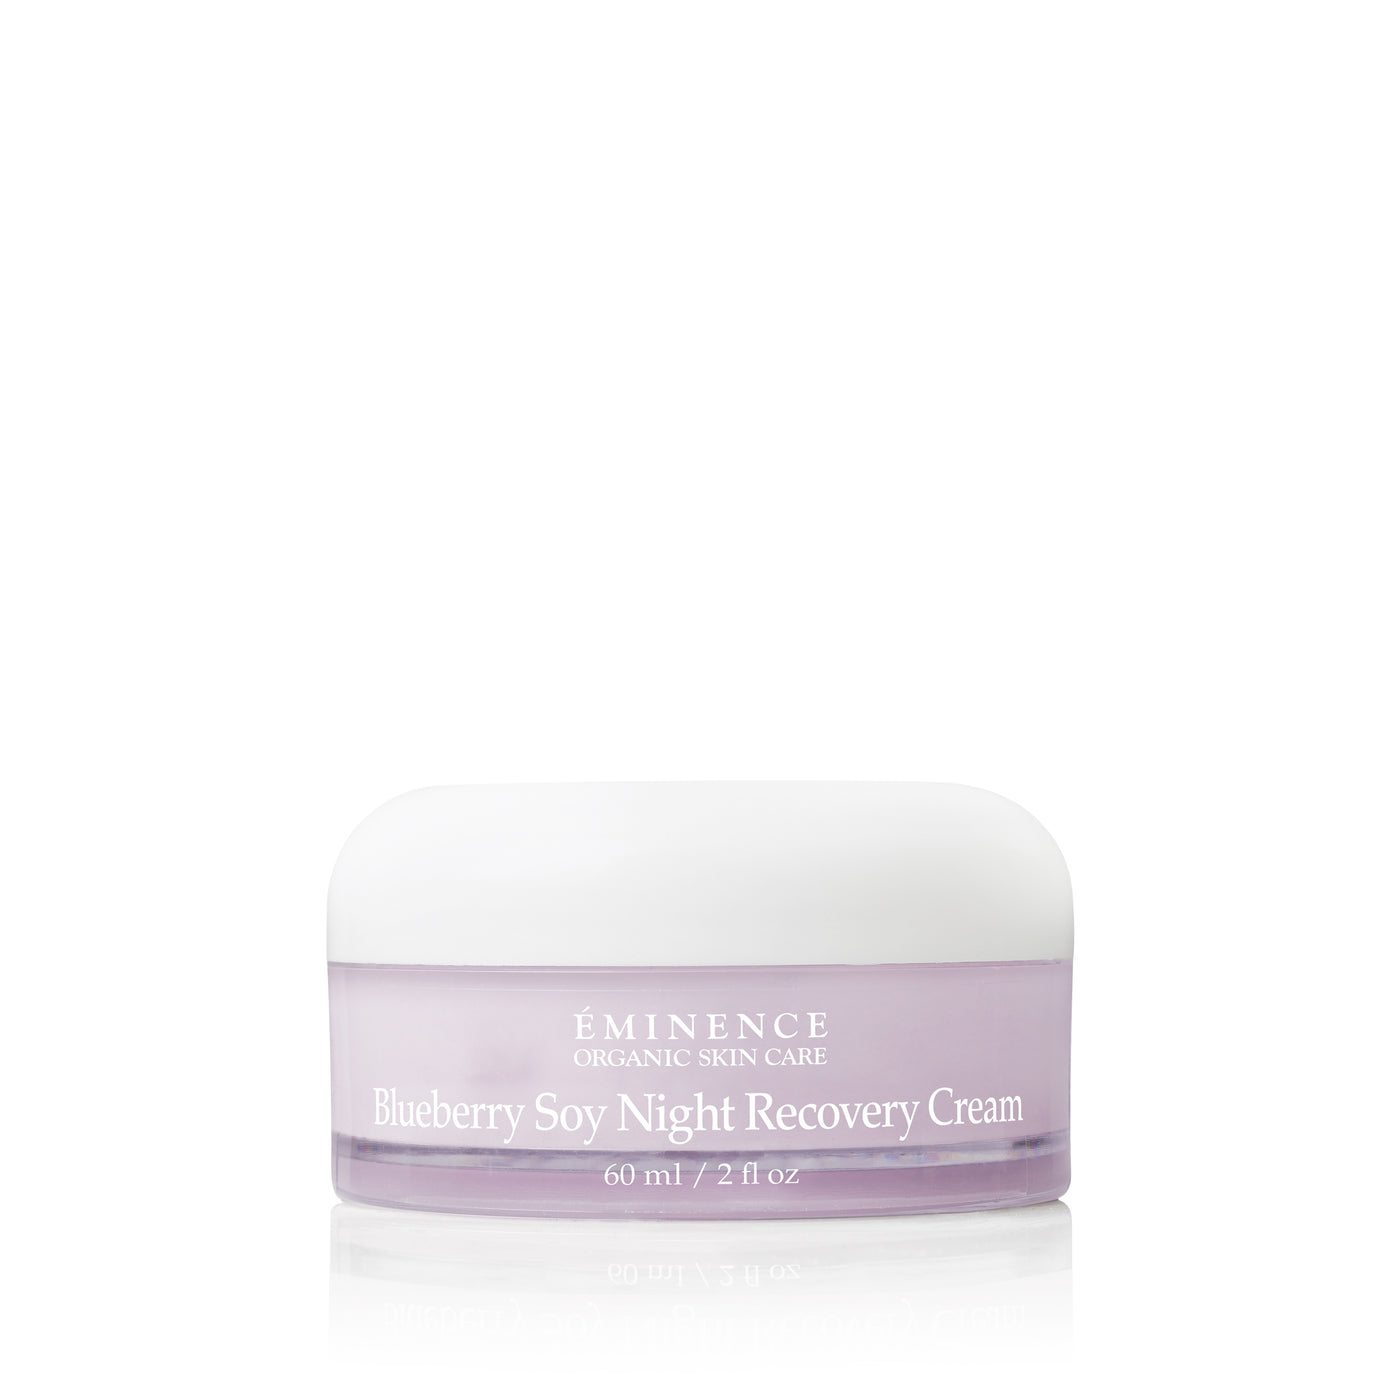 Eminence Organics Blueberry Soy Night Recovery Cream - Radiance Clean Beauty